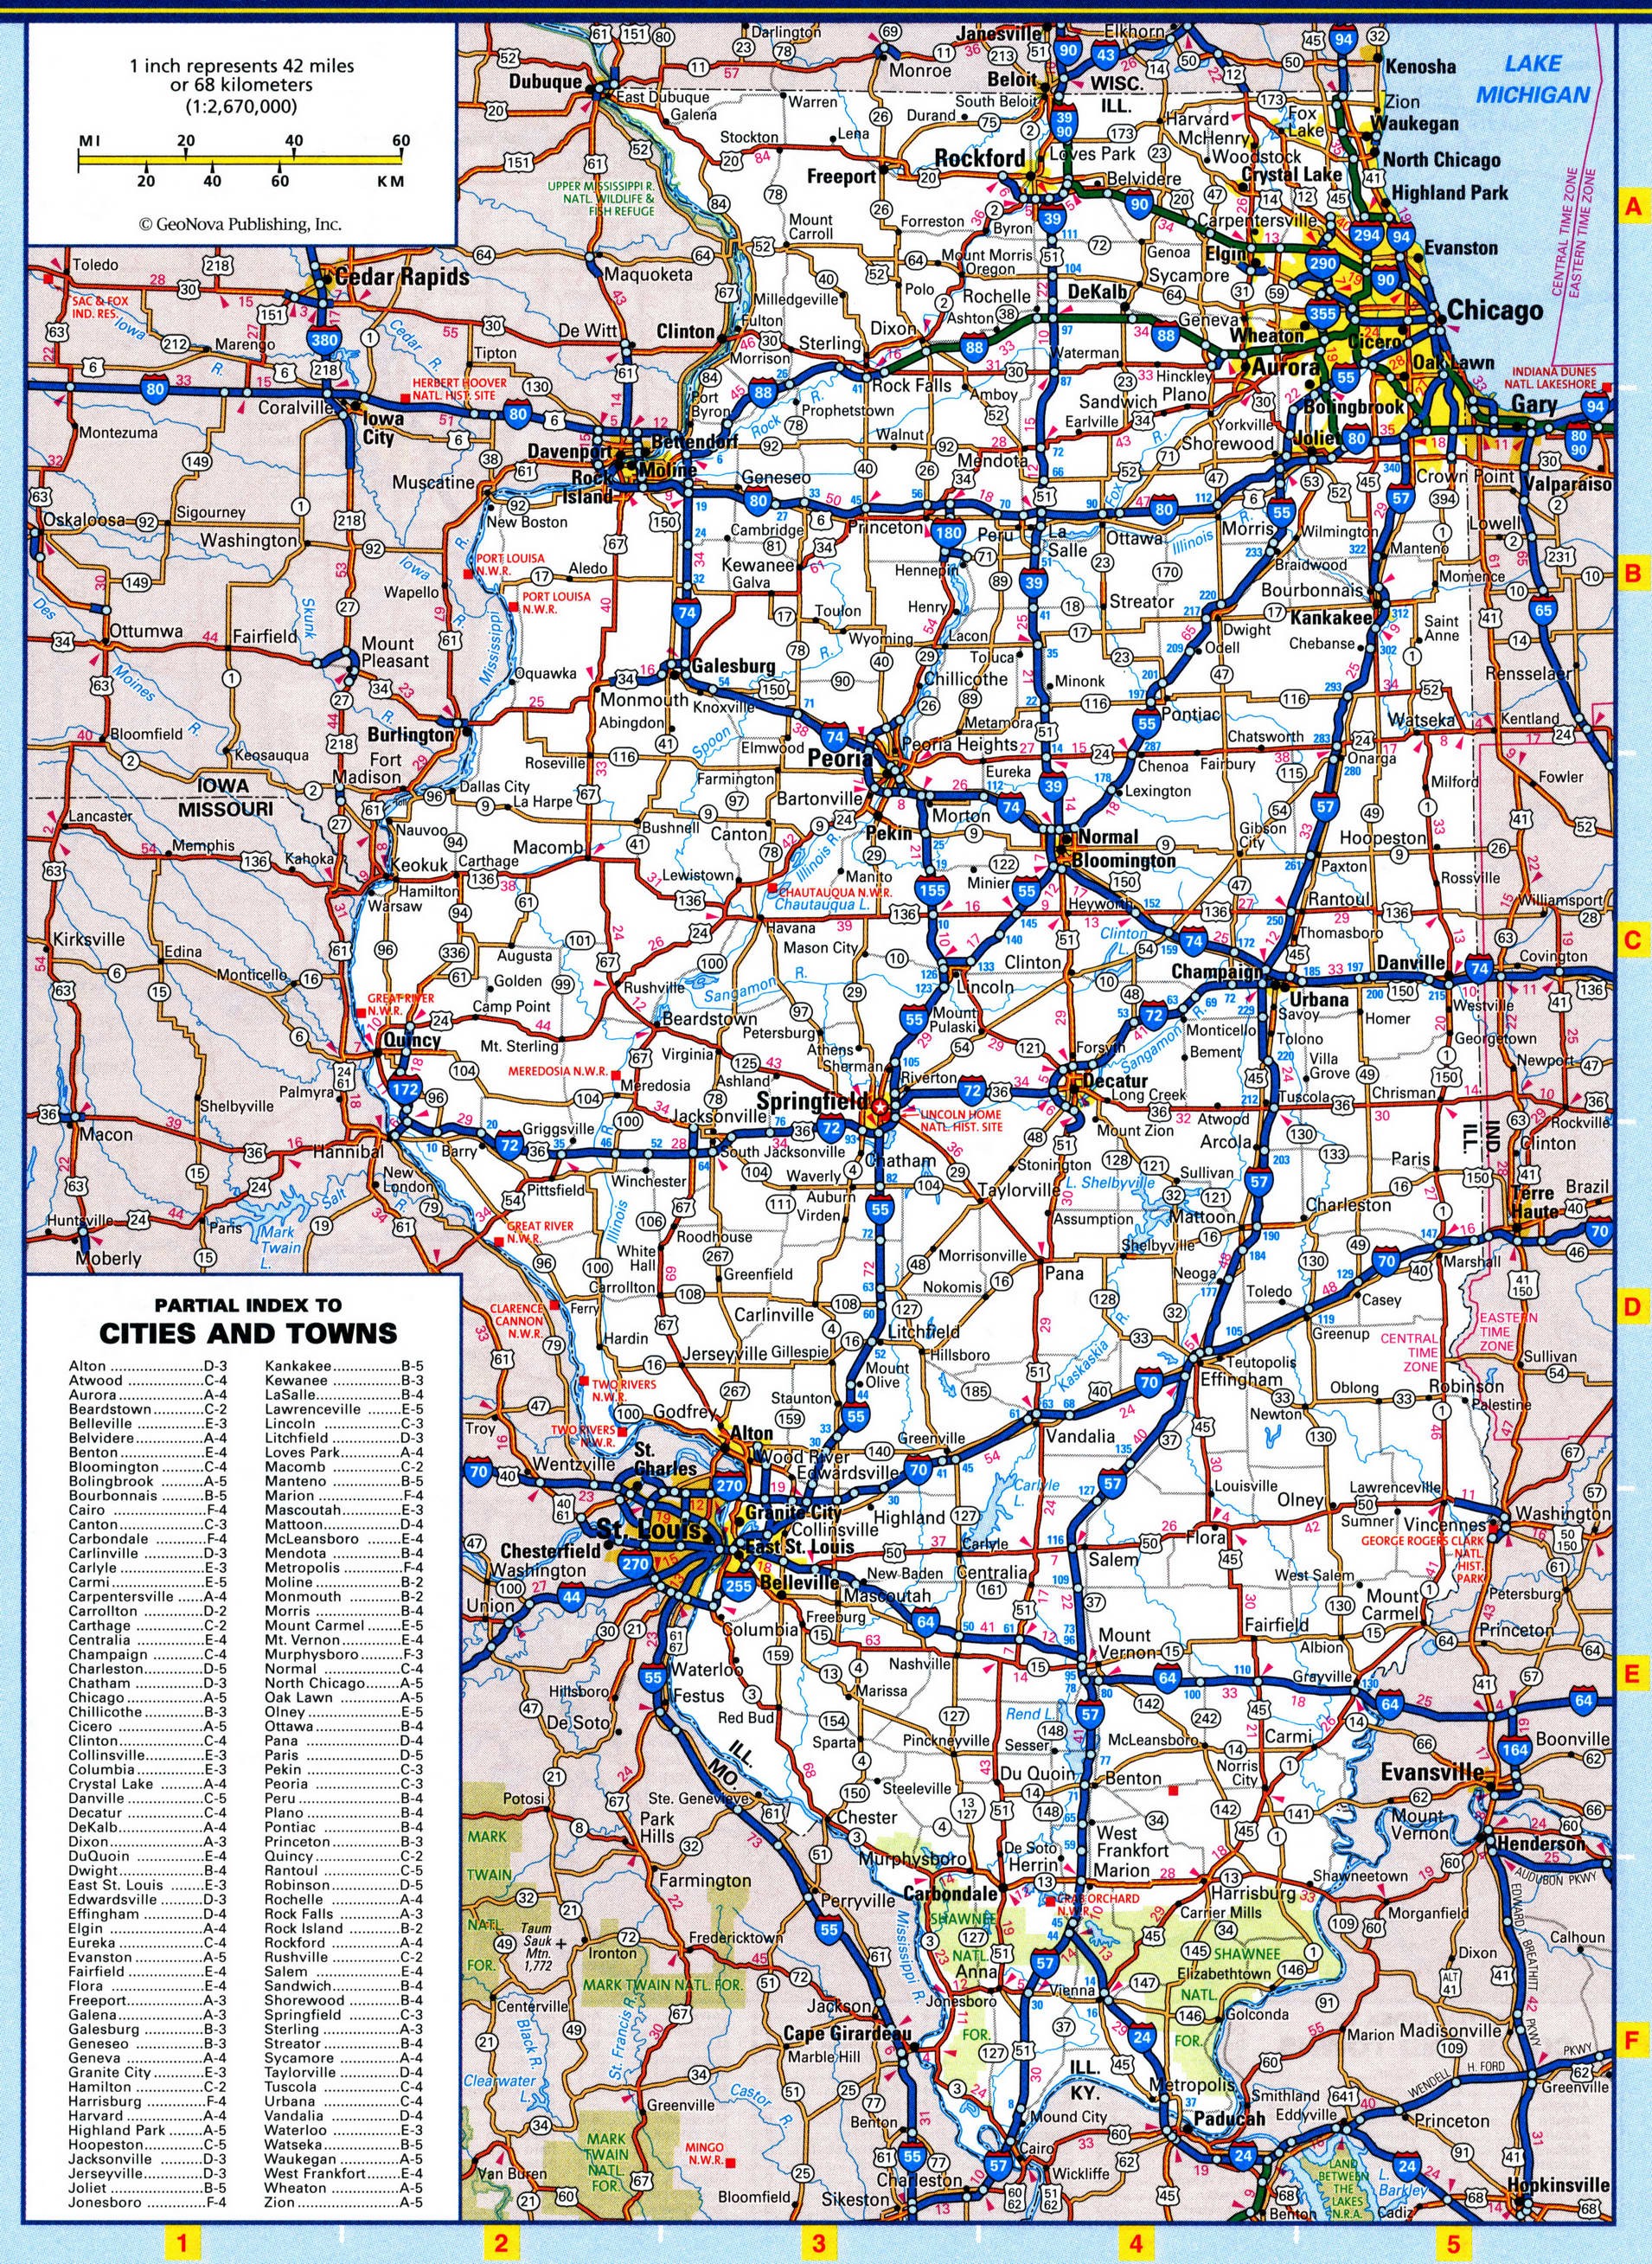 Illinois map with national and states parks